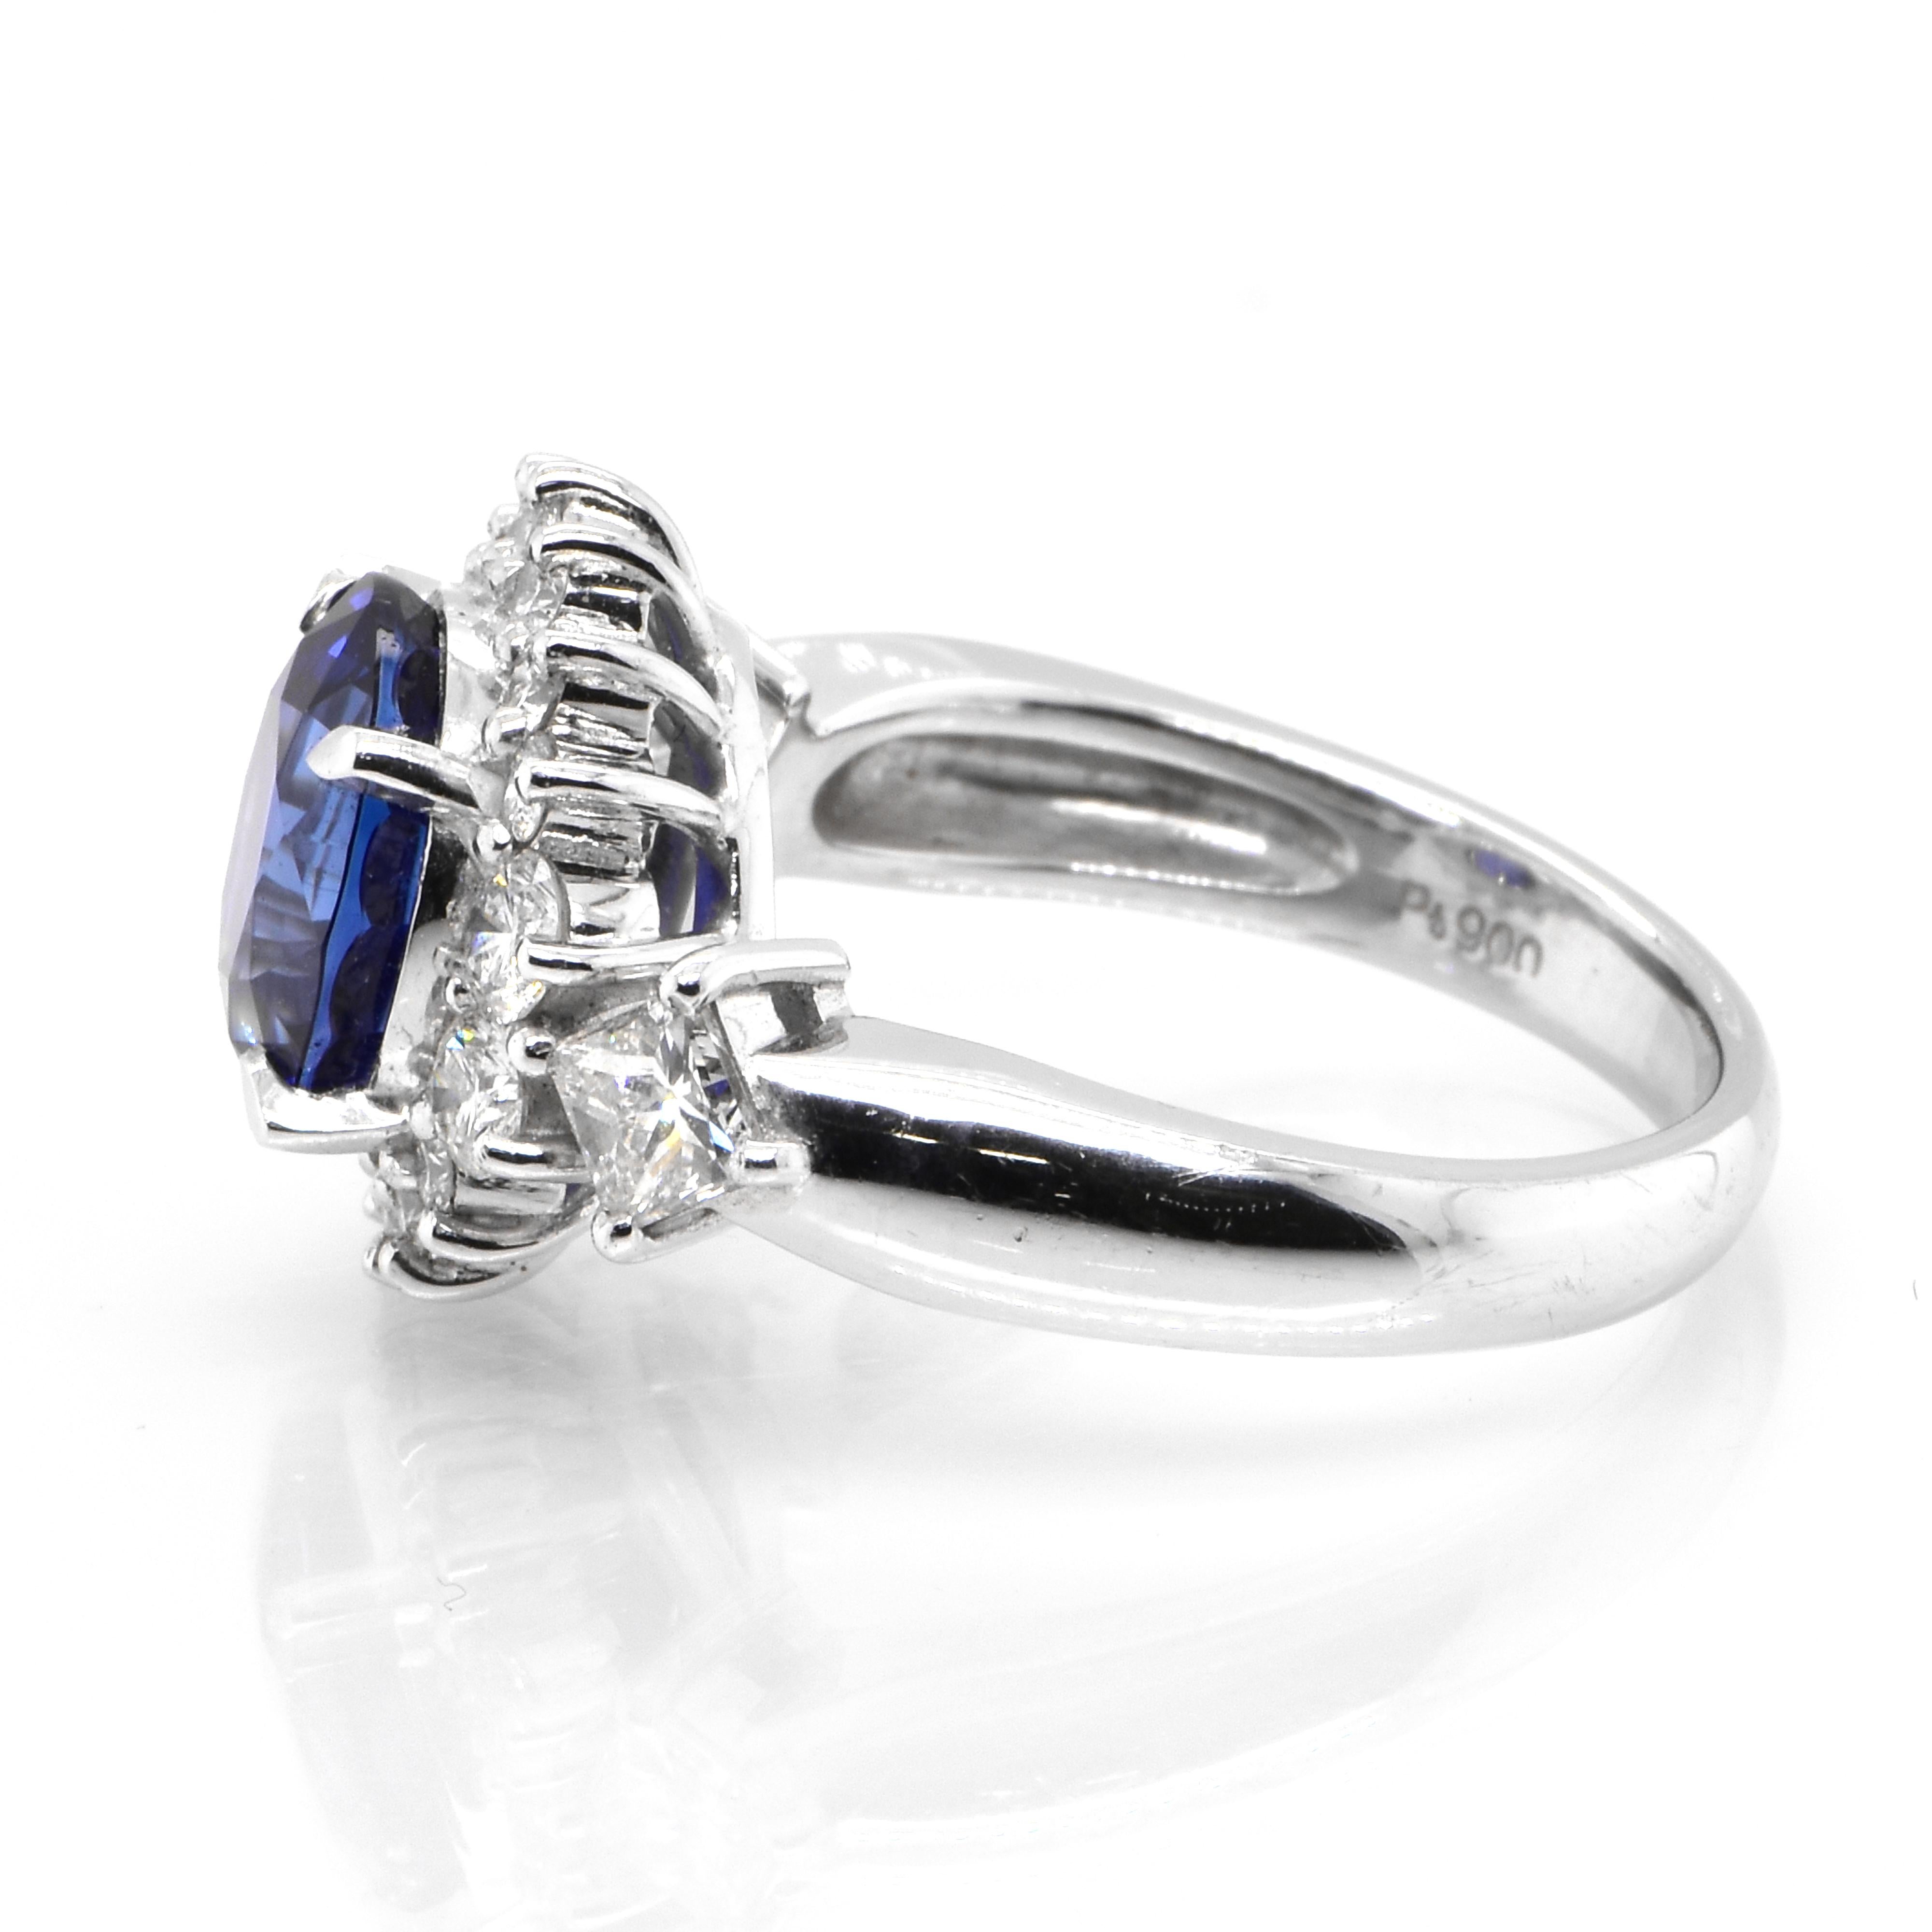 Oval Cut 3.21 Carat Natural Royal Blue Color Sapphire and Diamond Ring Made in Platinum For Sale